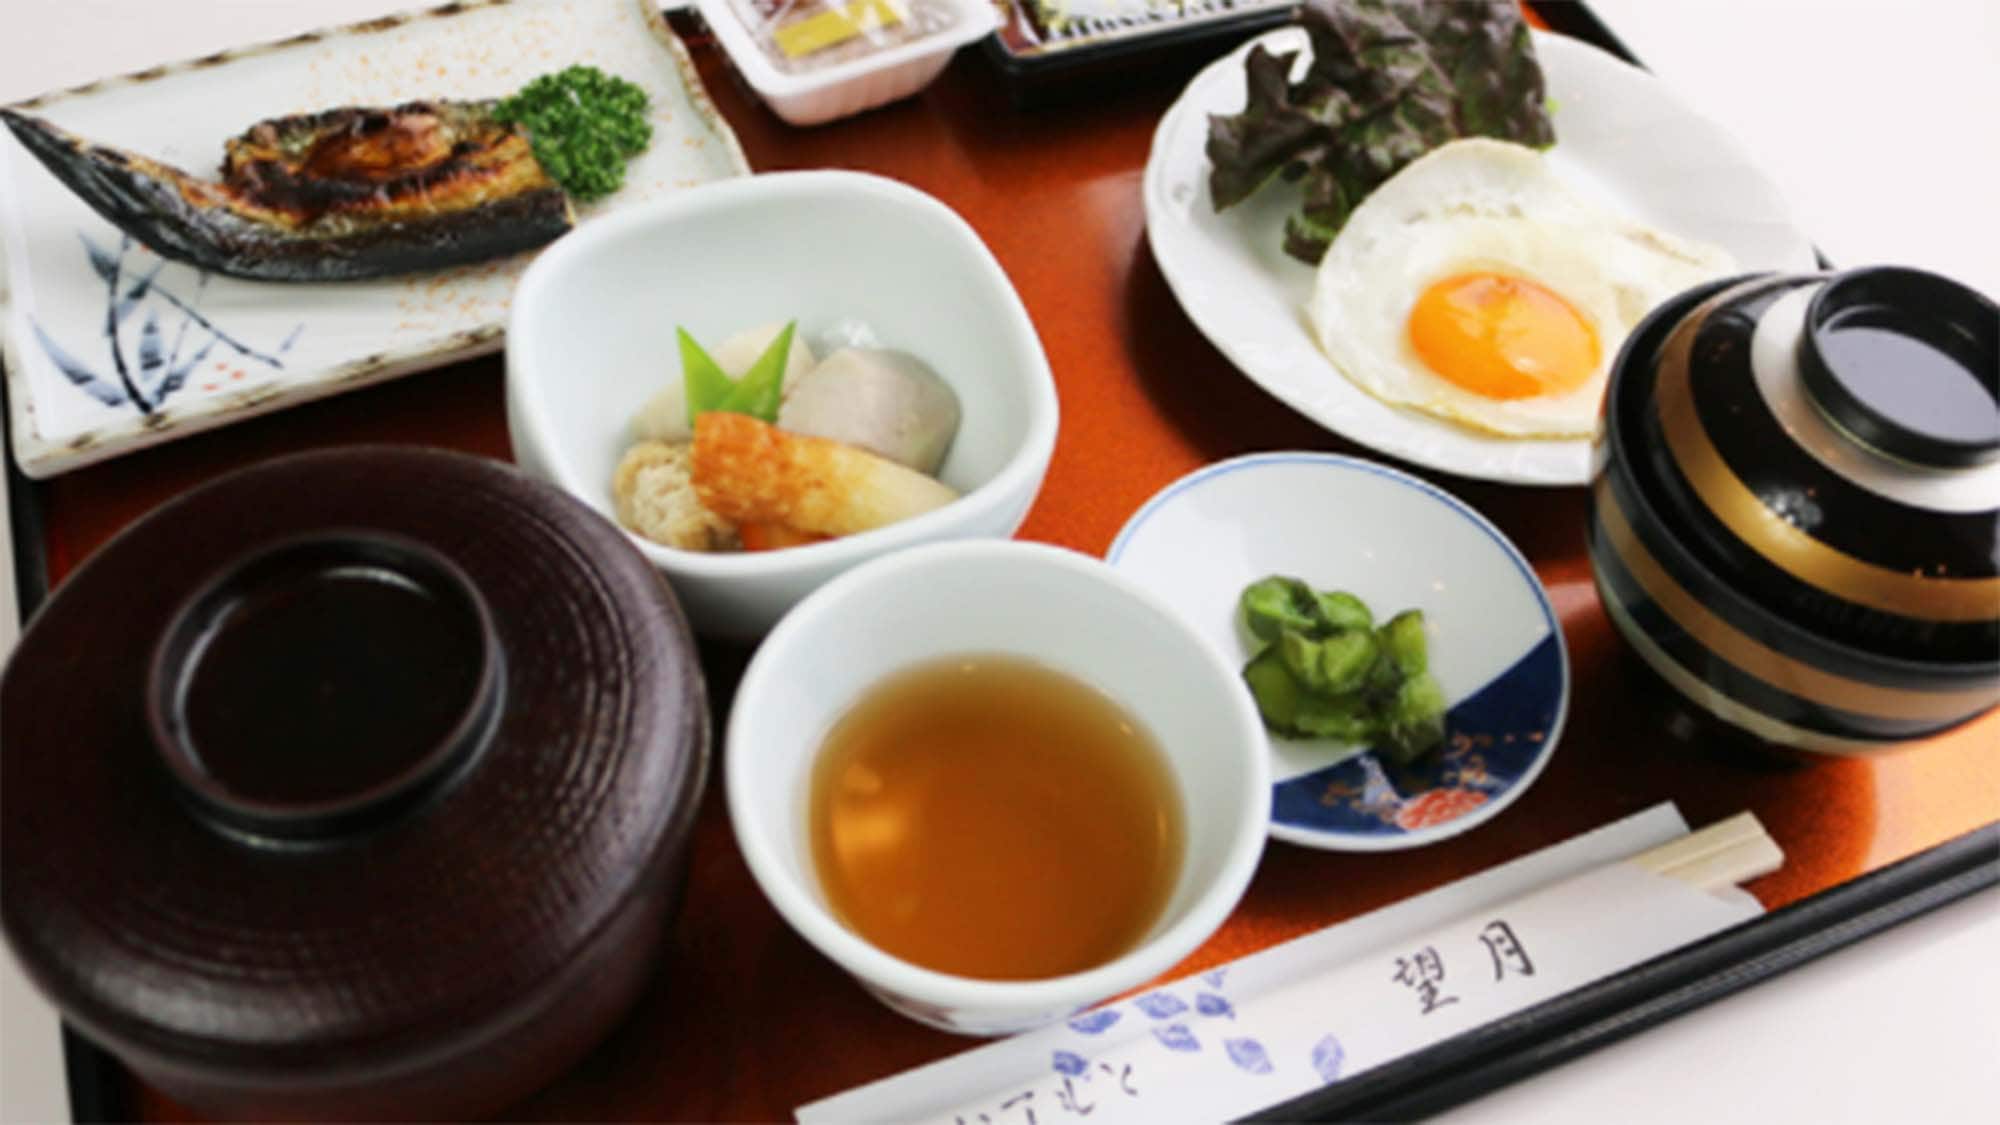 ・ Breakfast (Japanese food) example: You can enjoy it for 500 yen (excluding tax).